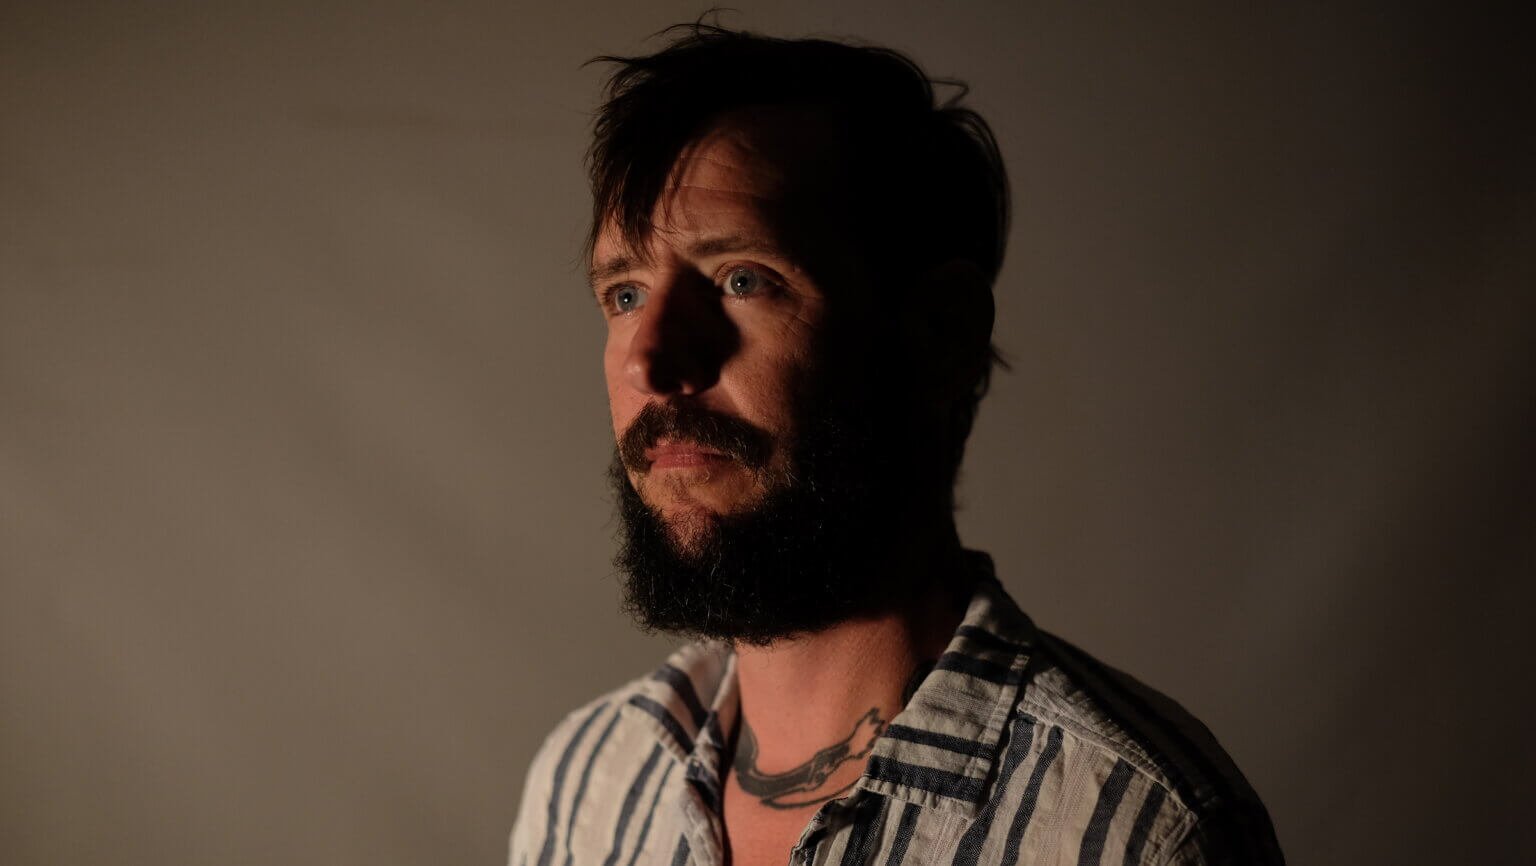 Band Of Horses have shared new single "Lights," the track is off their forthcoming release 'Things Are Great,' available March 4, 2022